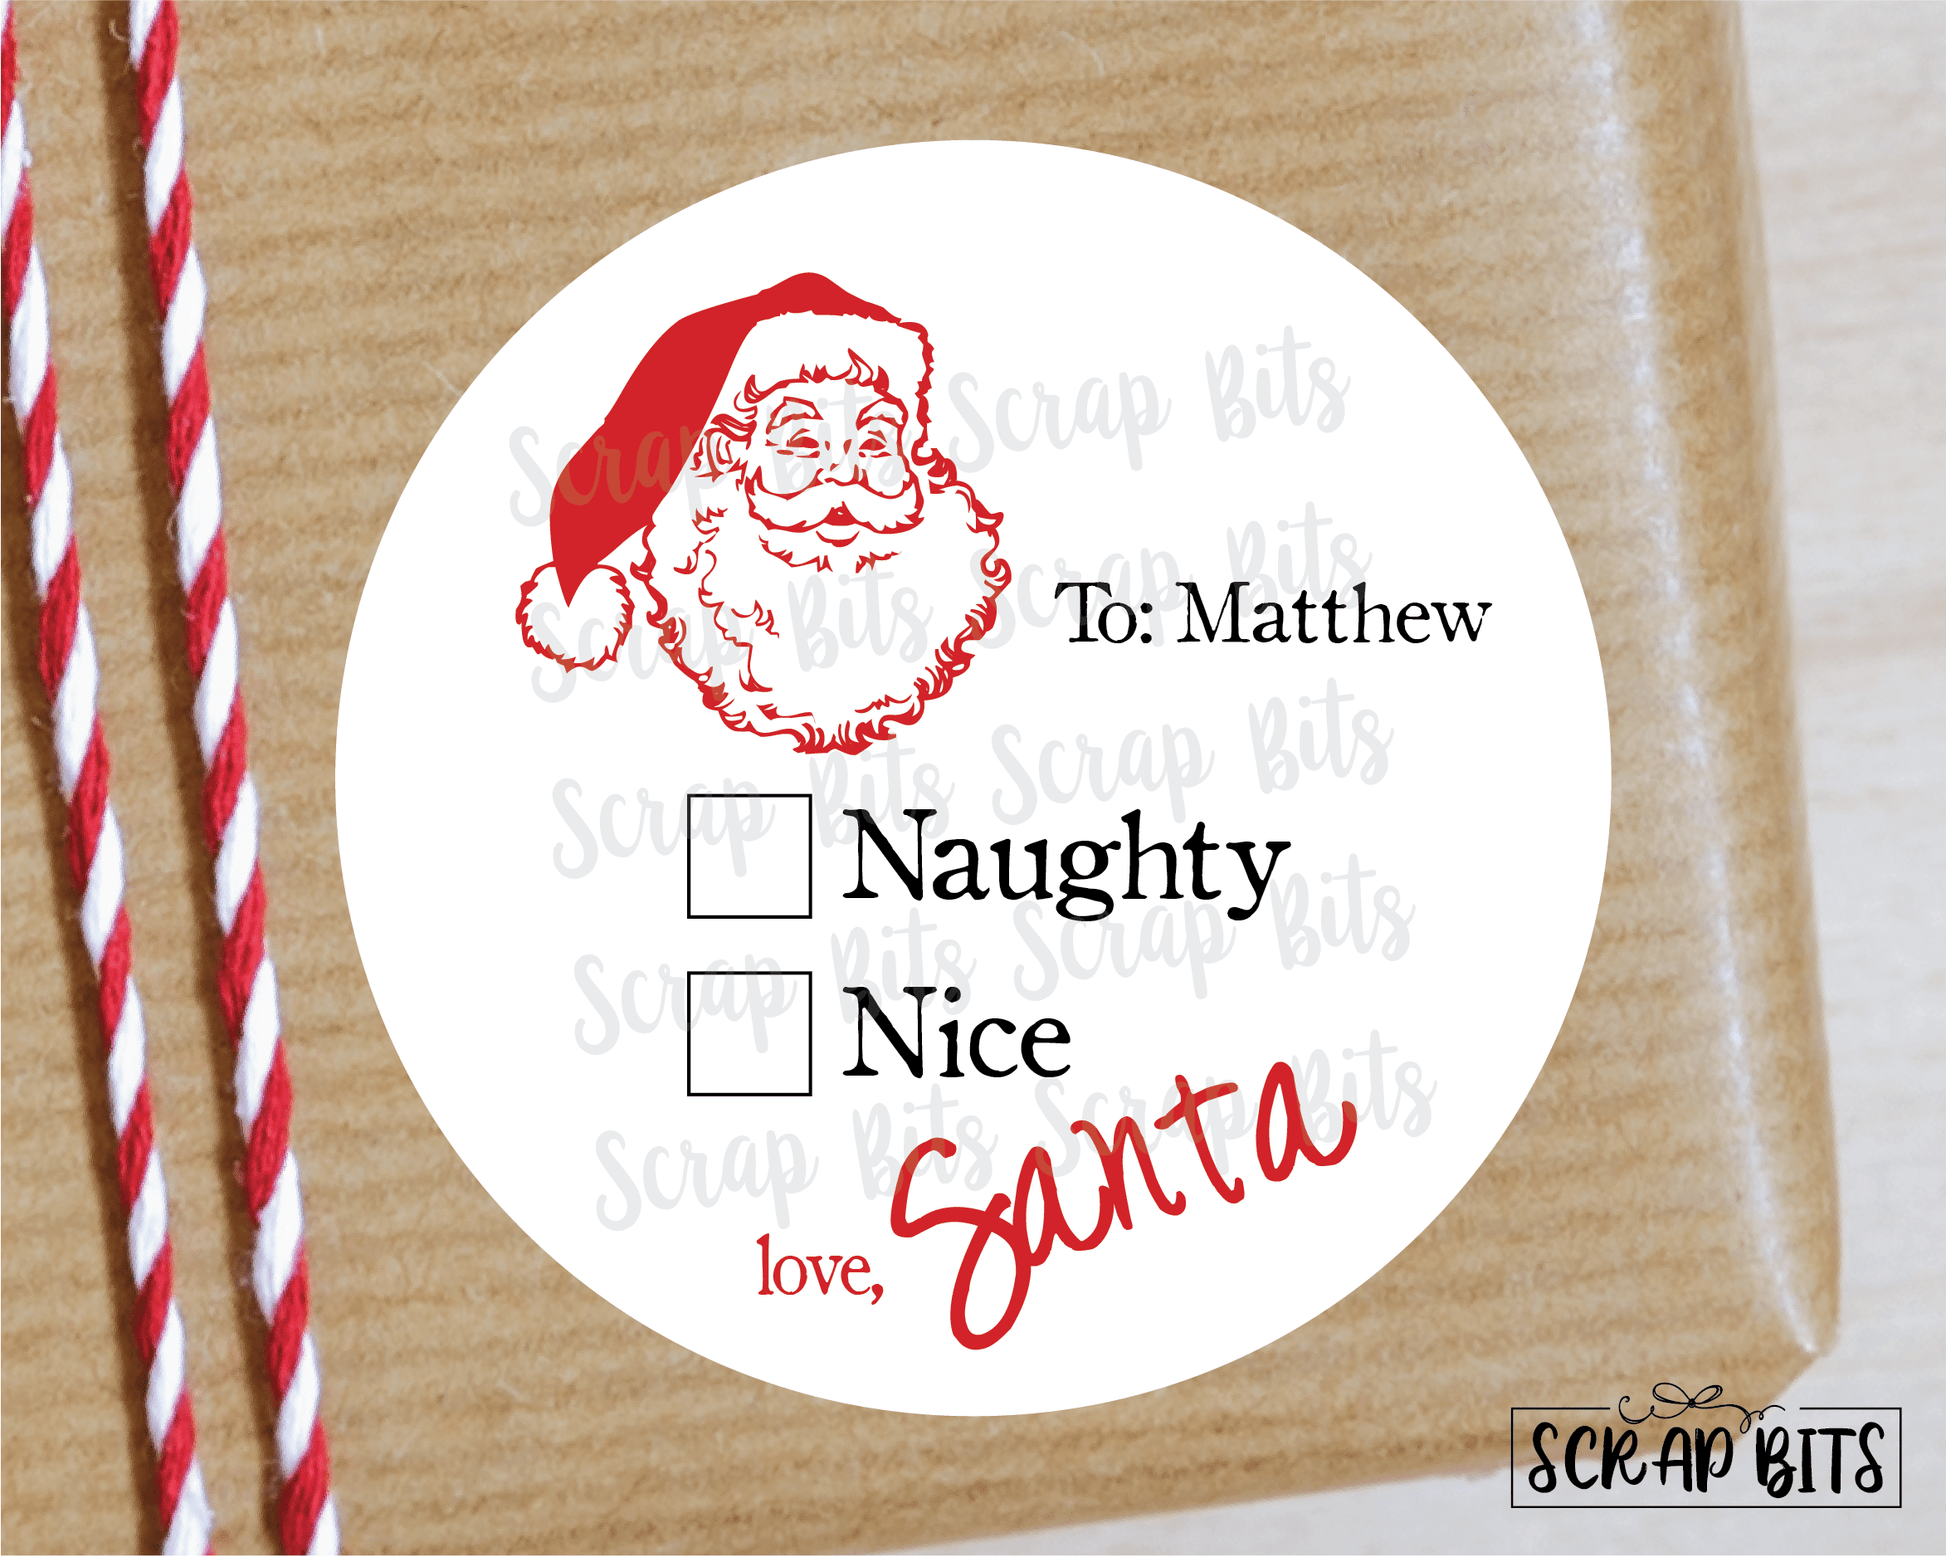 Naughty or Nice Stickers or Tags . Christmas Gift Labels - Scrap Bits